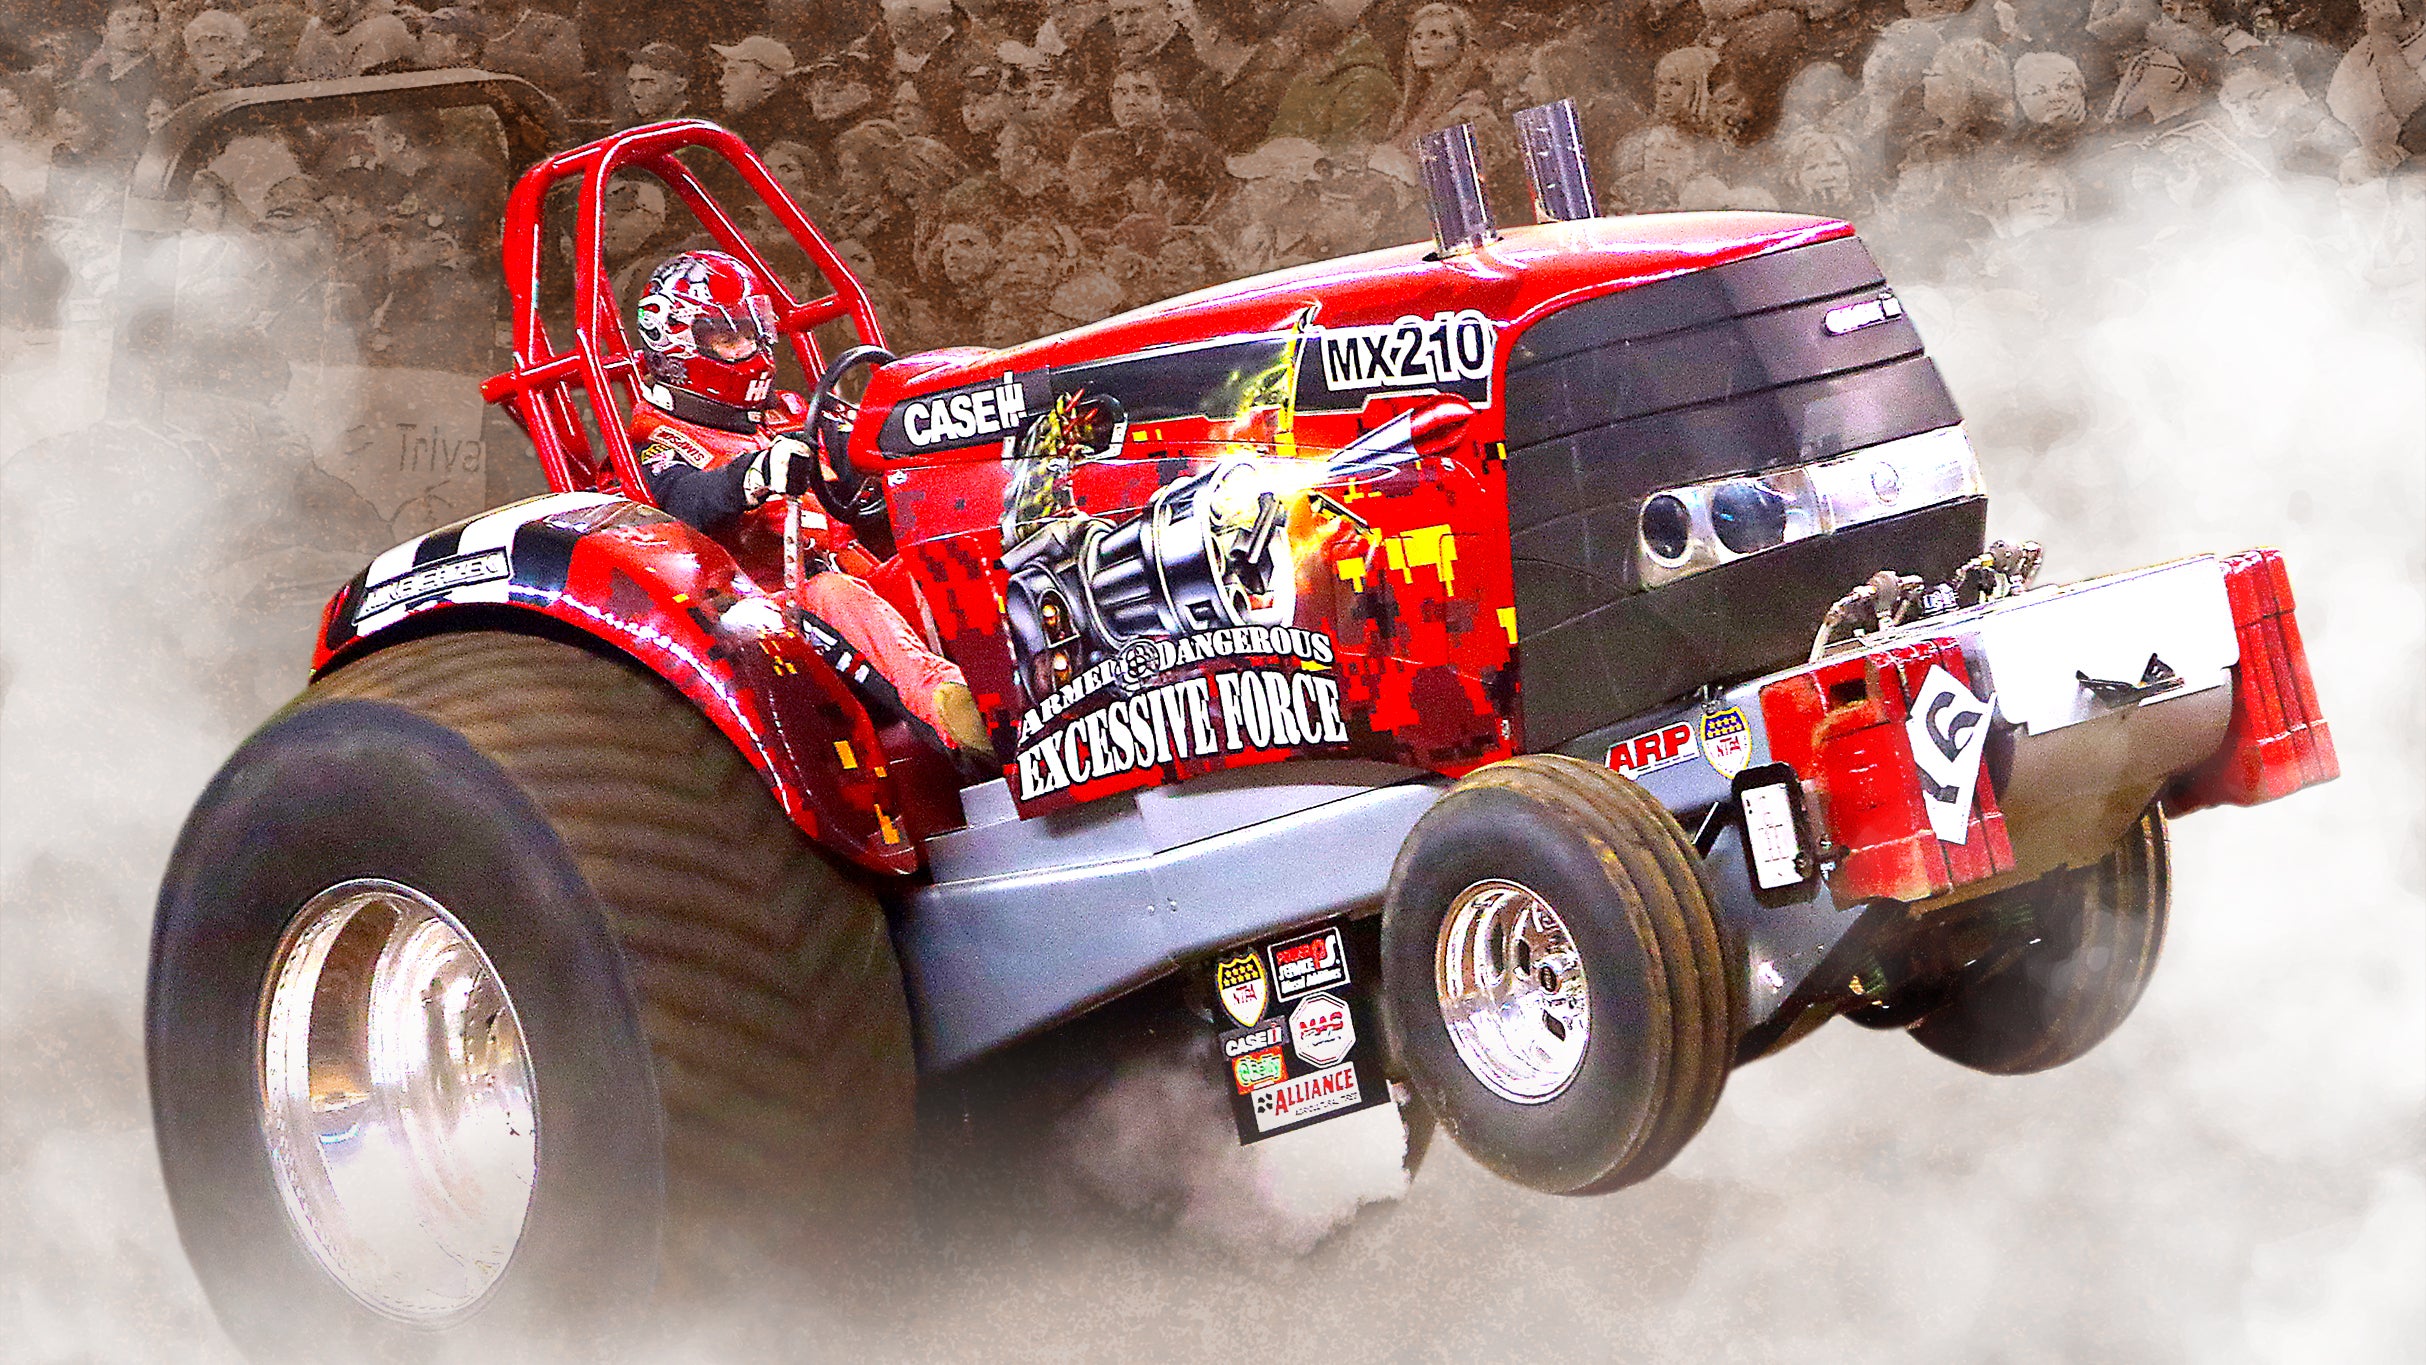 National Farm Machinery Show Championship Tractor Pull in Louisville promo photo for Exclusive presale offer code